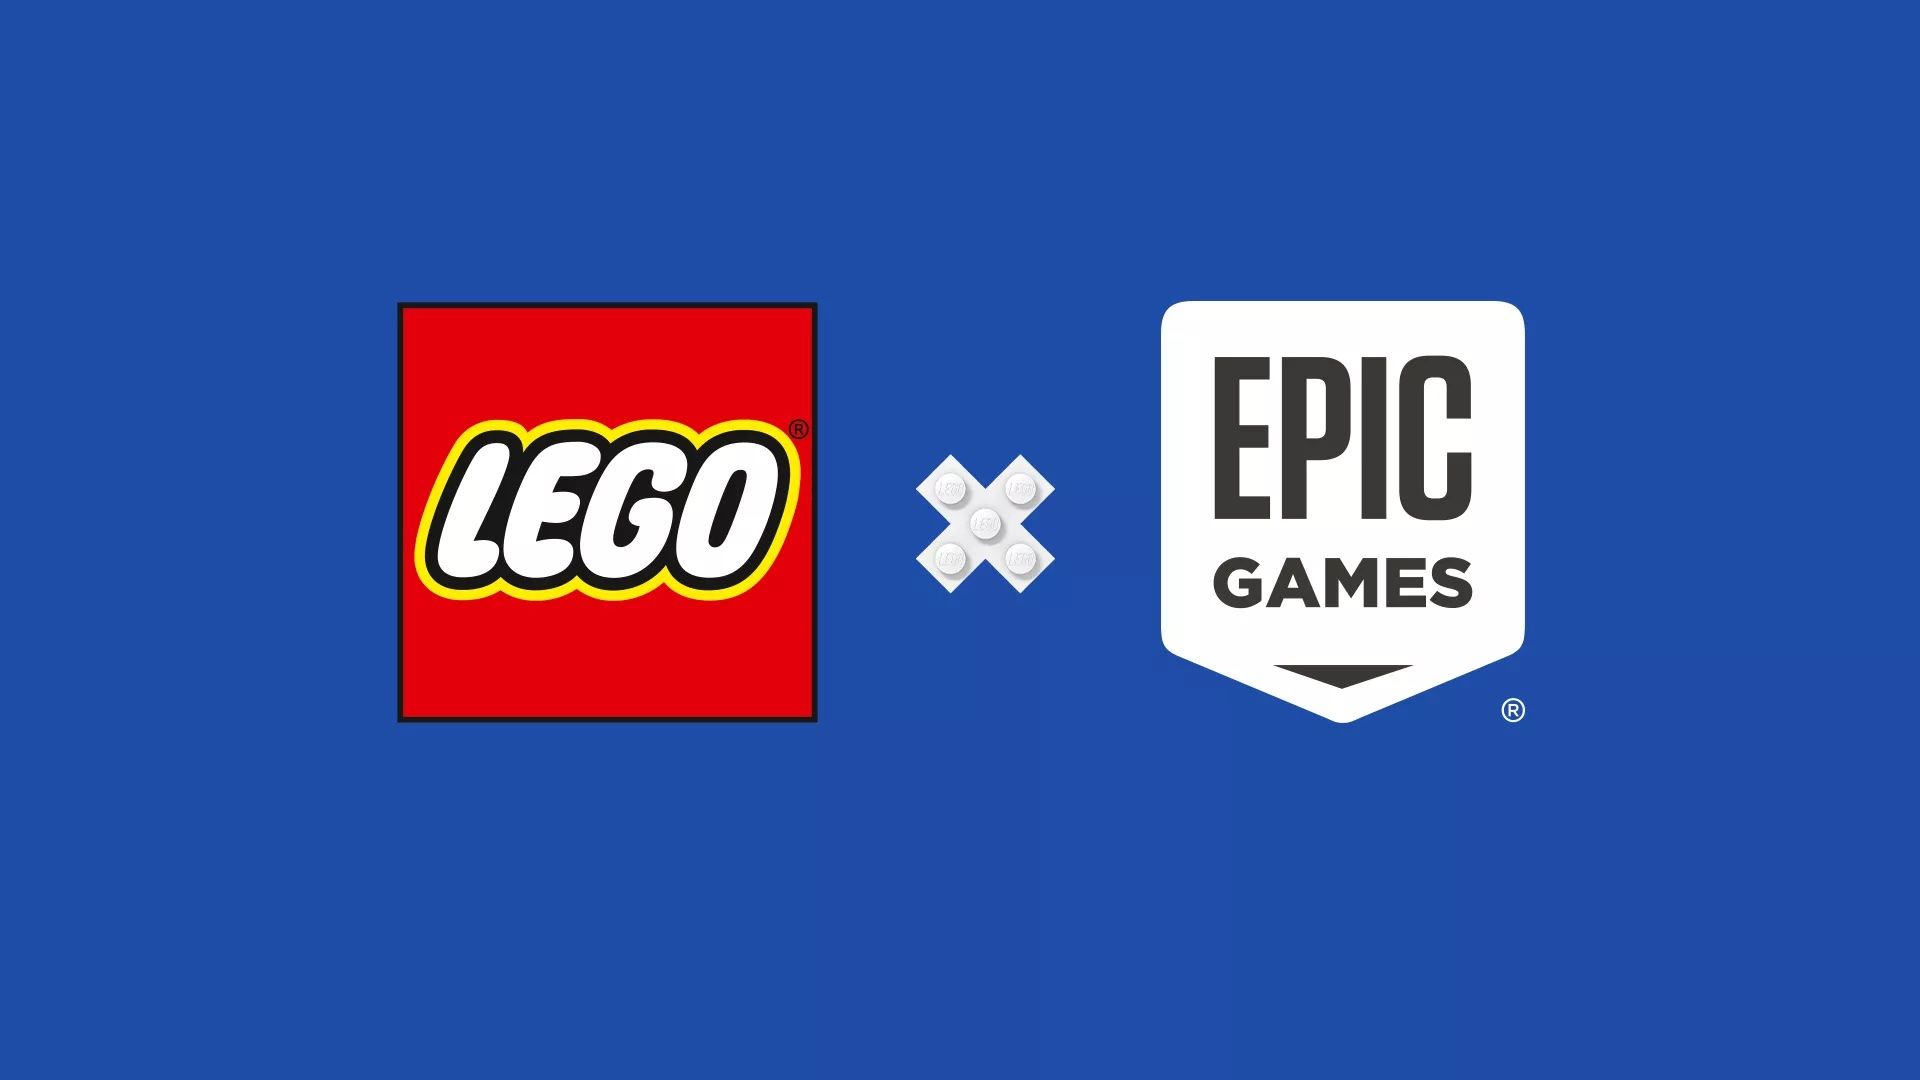 The logos of Lego and Epic Games (makers of Fortnite)